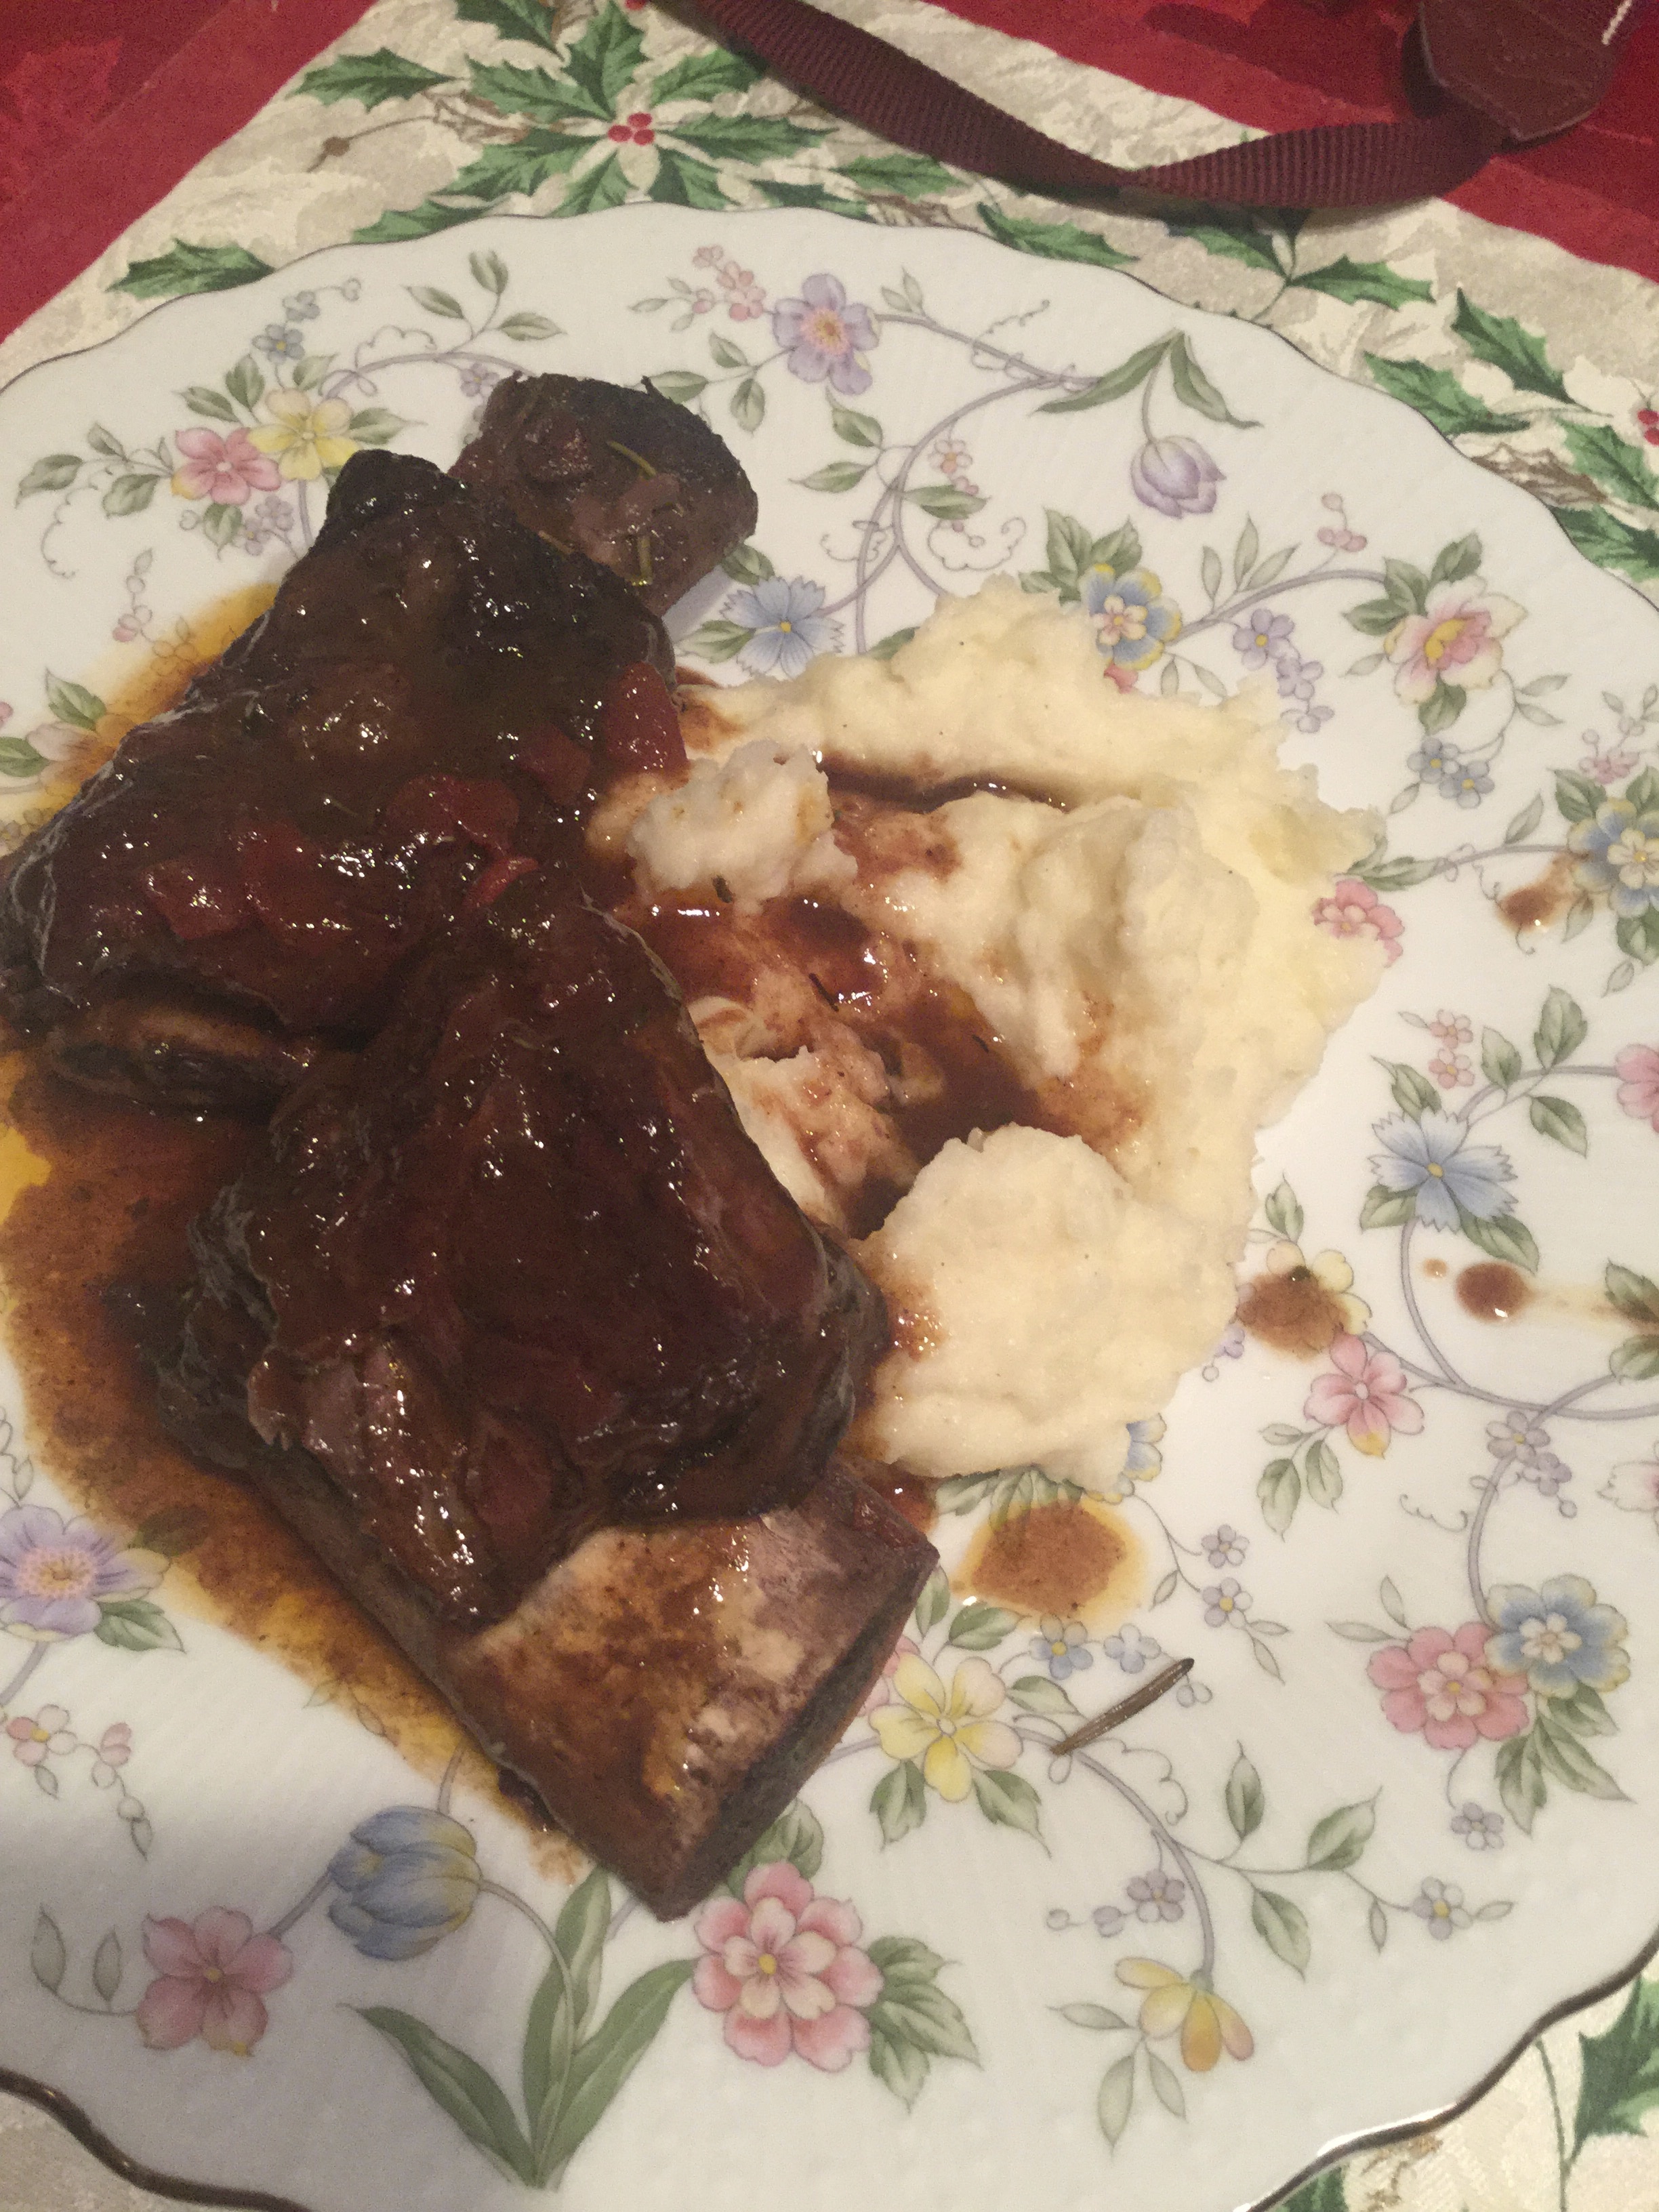 Braised short ribs (another Rachael Ray recipe)